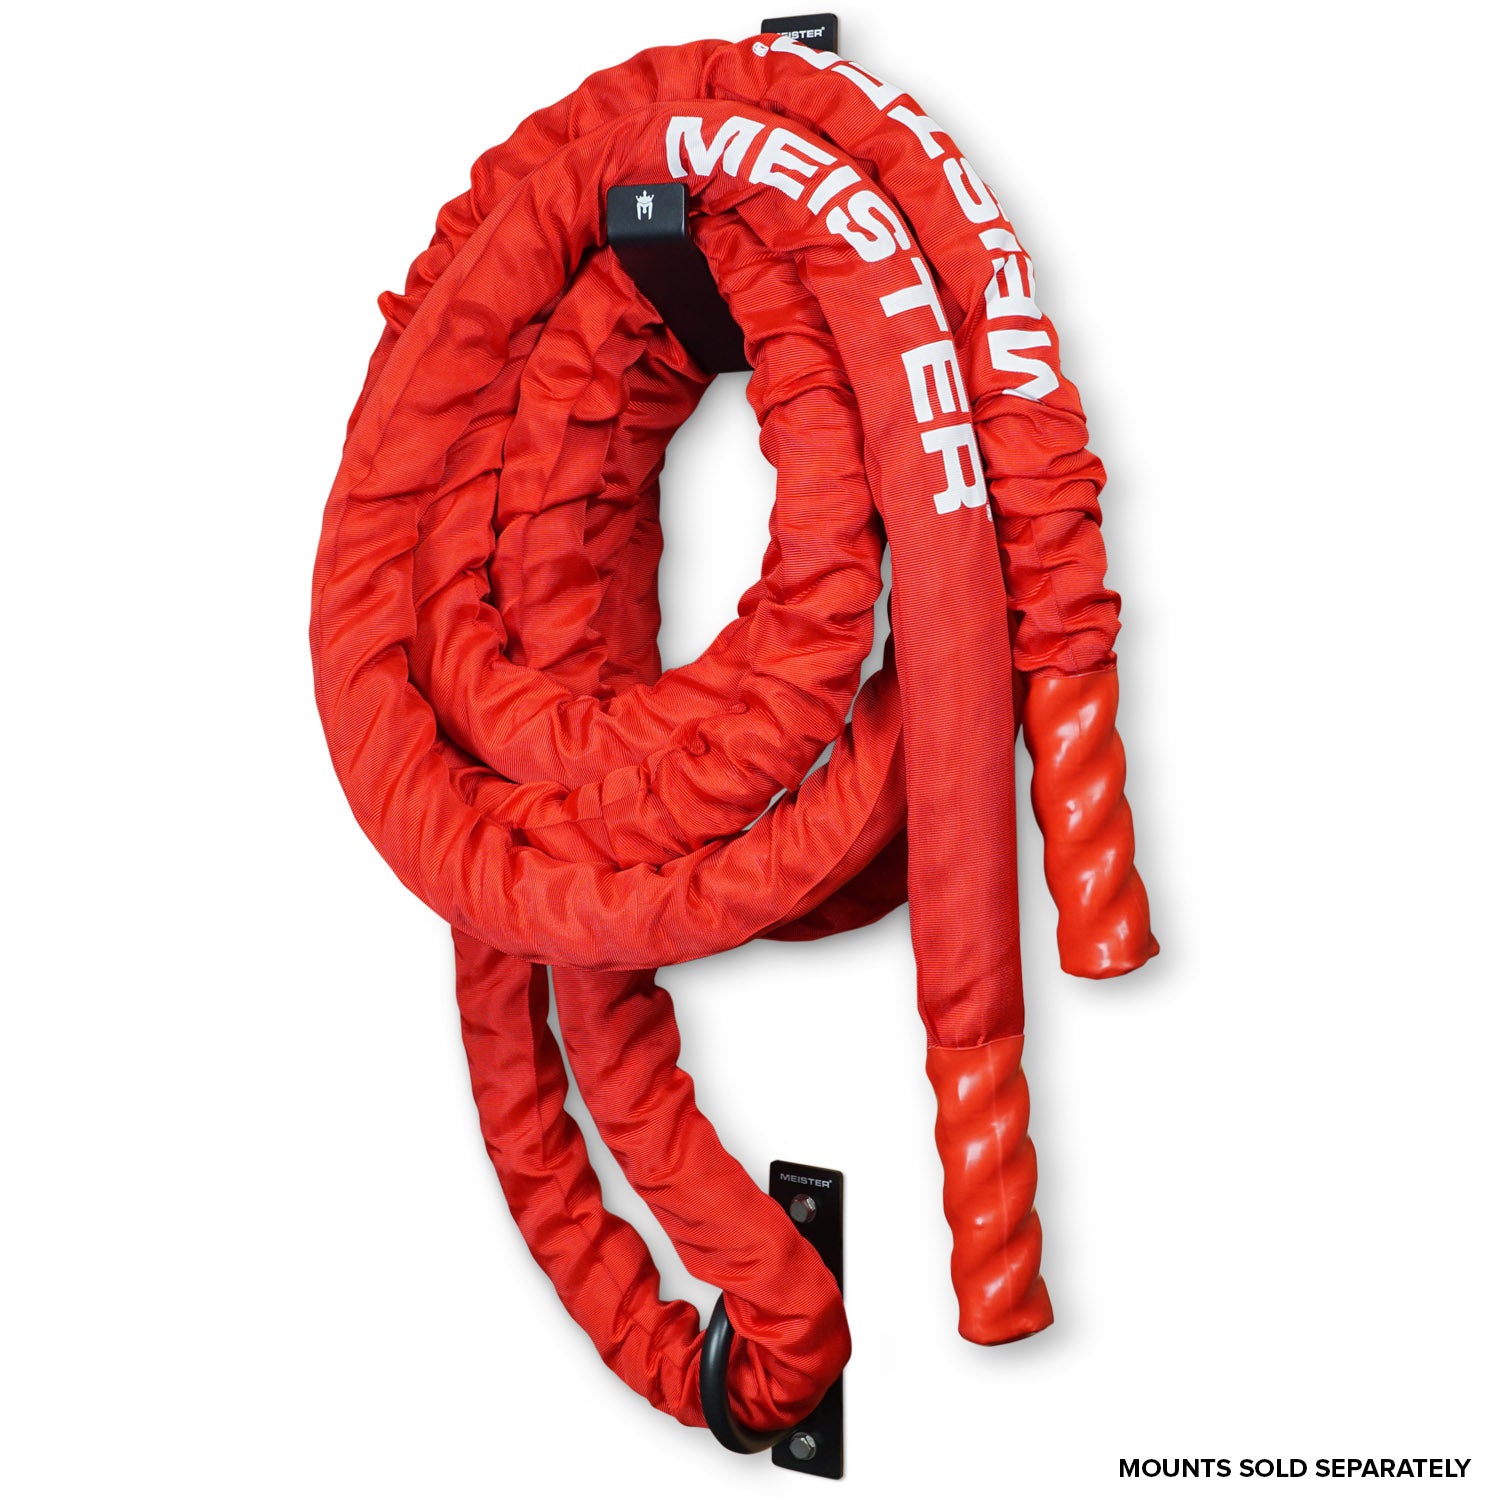 Meister BEAST Professional Sheathed Battle Rope - 2.5" Diameter / Red